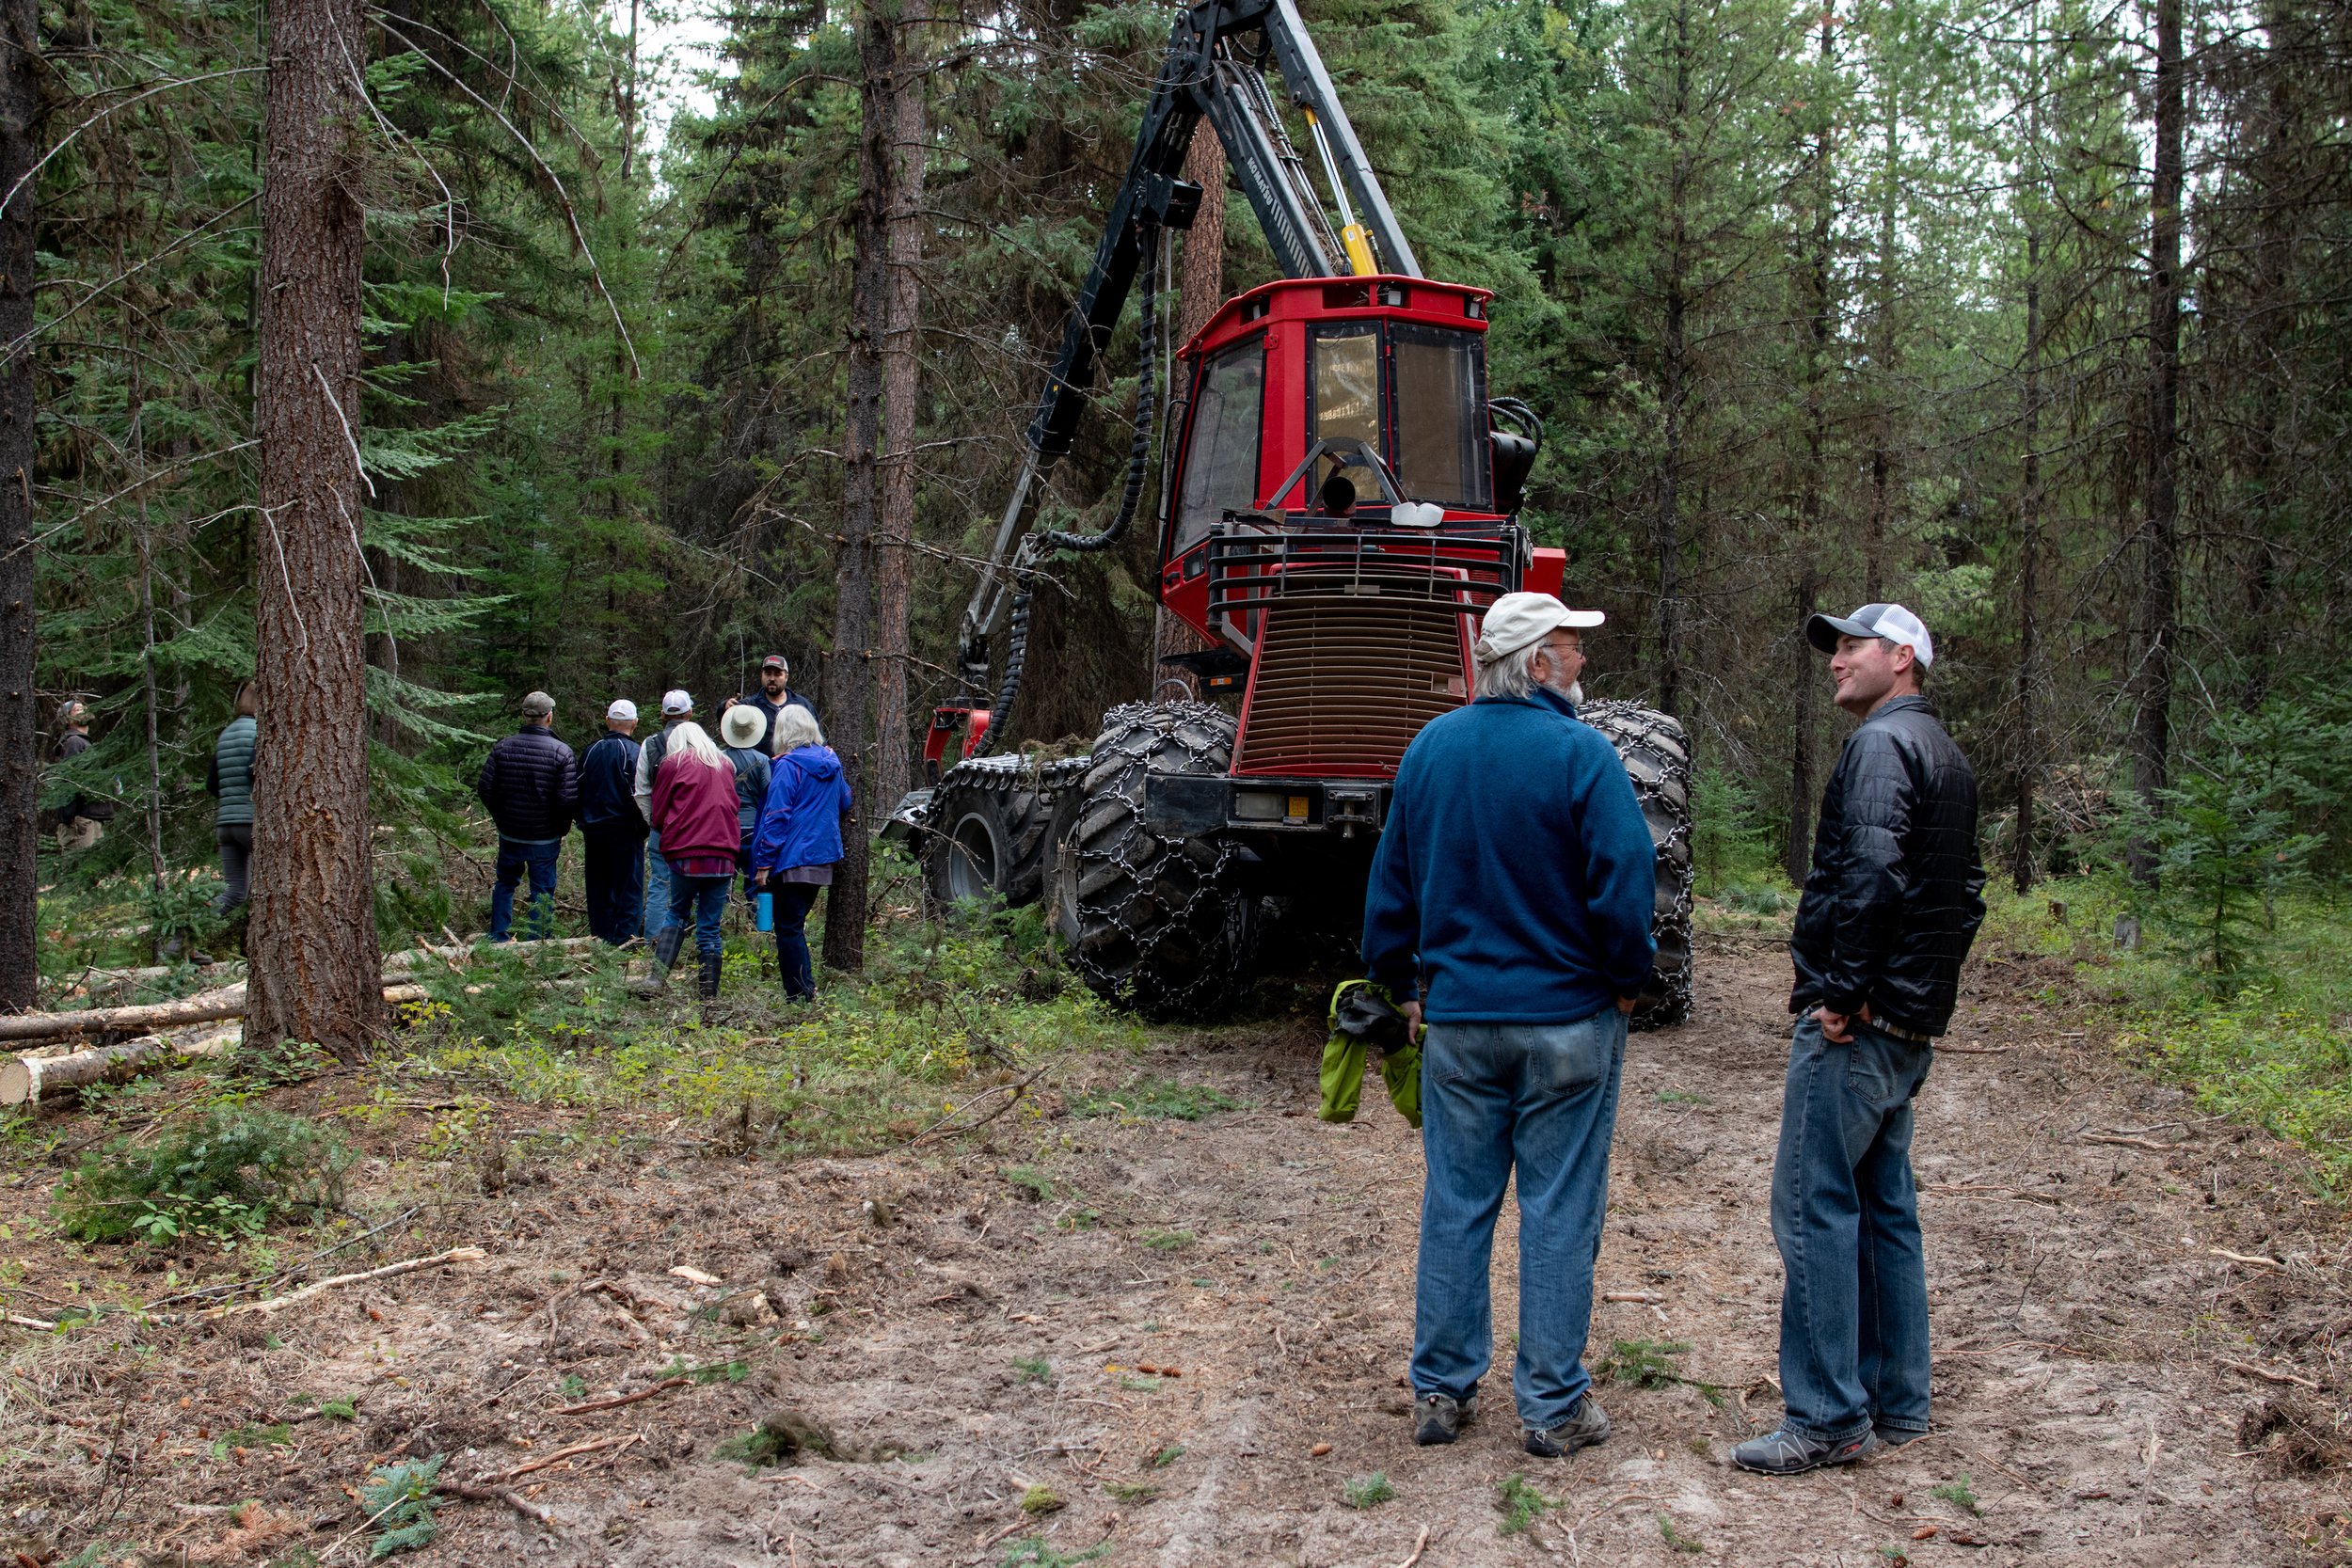  Public tour of the fuels reduction/forest thinning project completed by Euchre Mountain Logging on the SLF. (August 2021) 